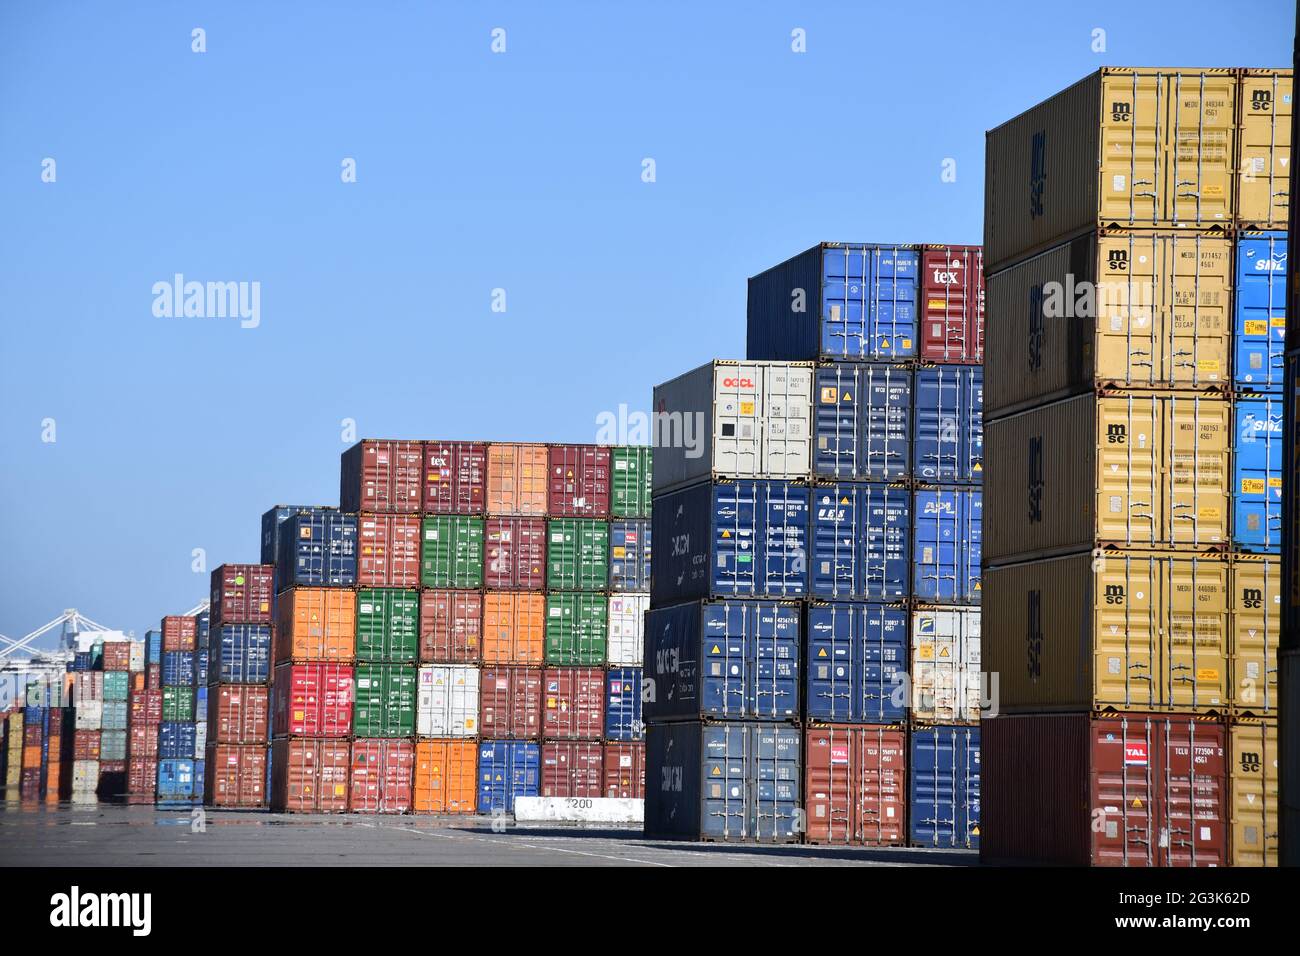 Shipping containers are loaded onto ships at the Port of Oakland, California, one of the busiest global freight ports on the West Coast. Stock Photo